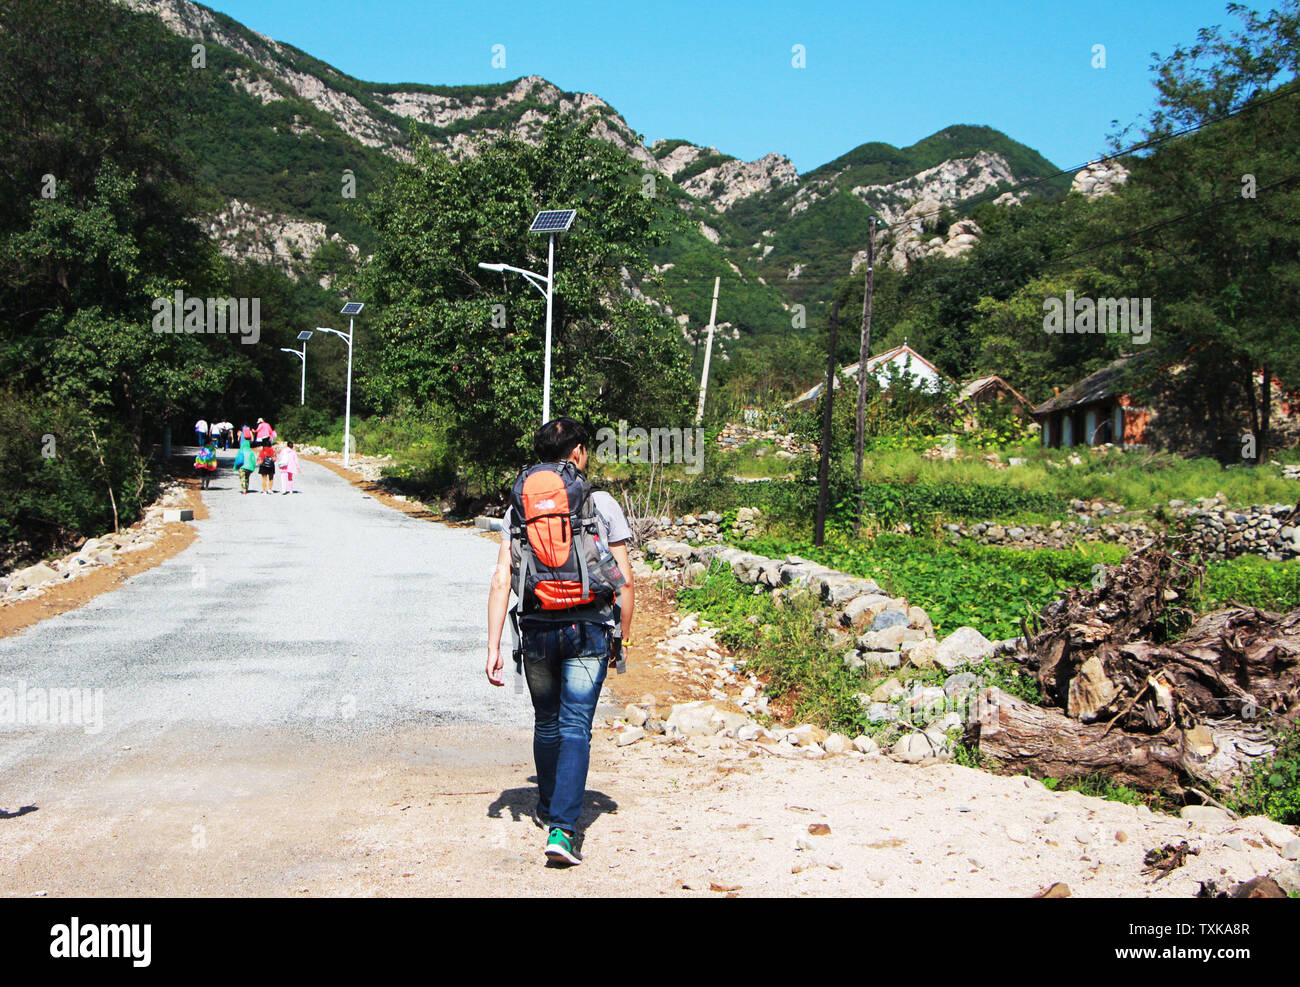 A person went on a trip alone, carrying a mountaineering bag, sunny, in a good mood Stock Photo